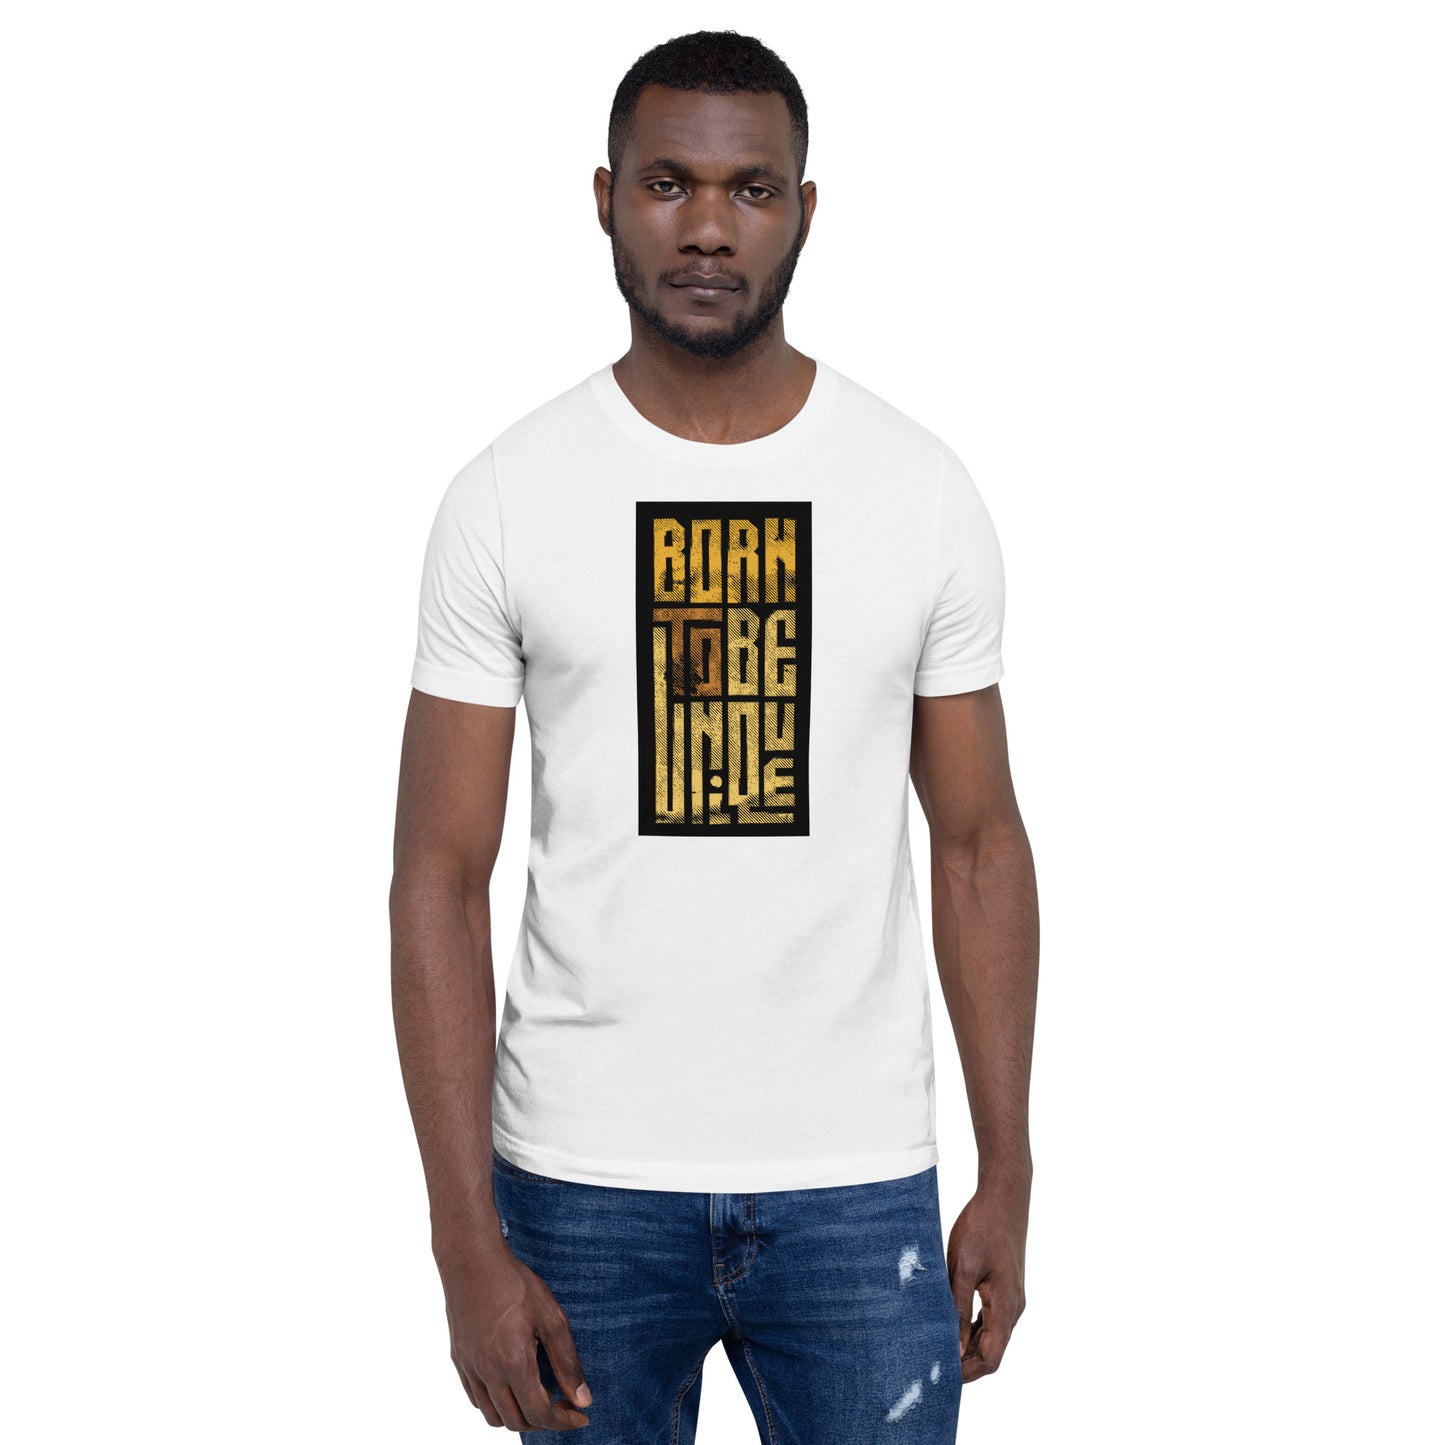 T-shirt - Nike Dunk Low Championship Goldenrod (2021) (Born to be unique)